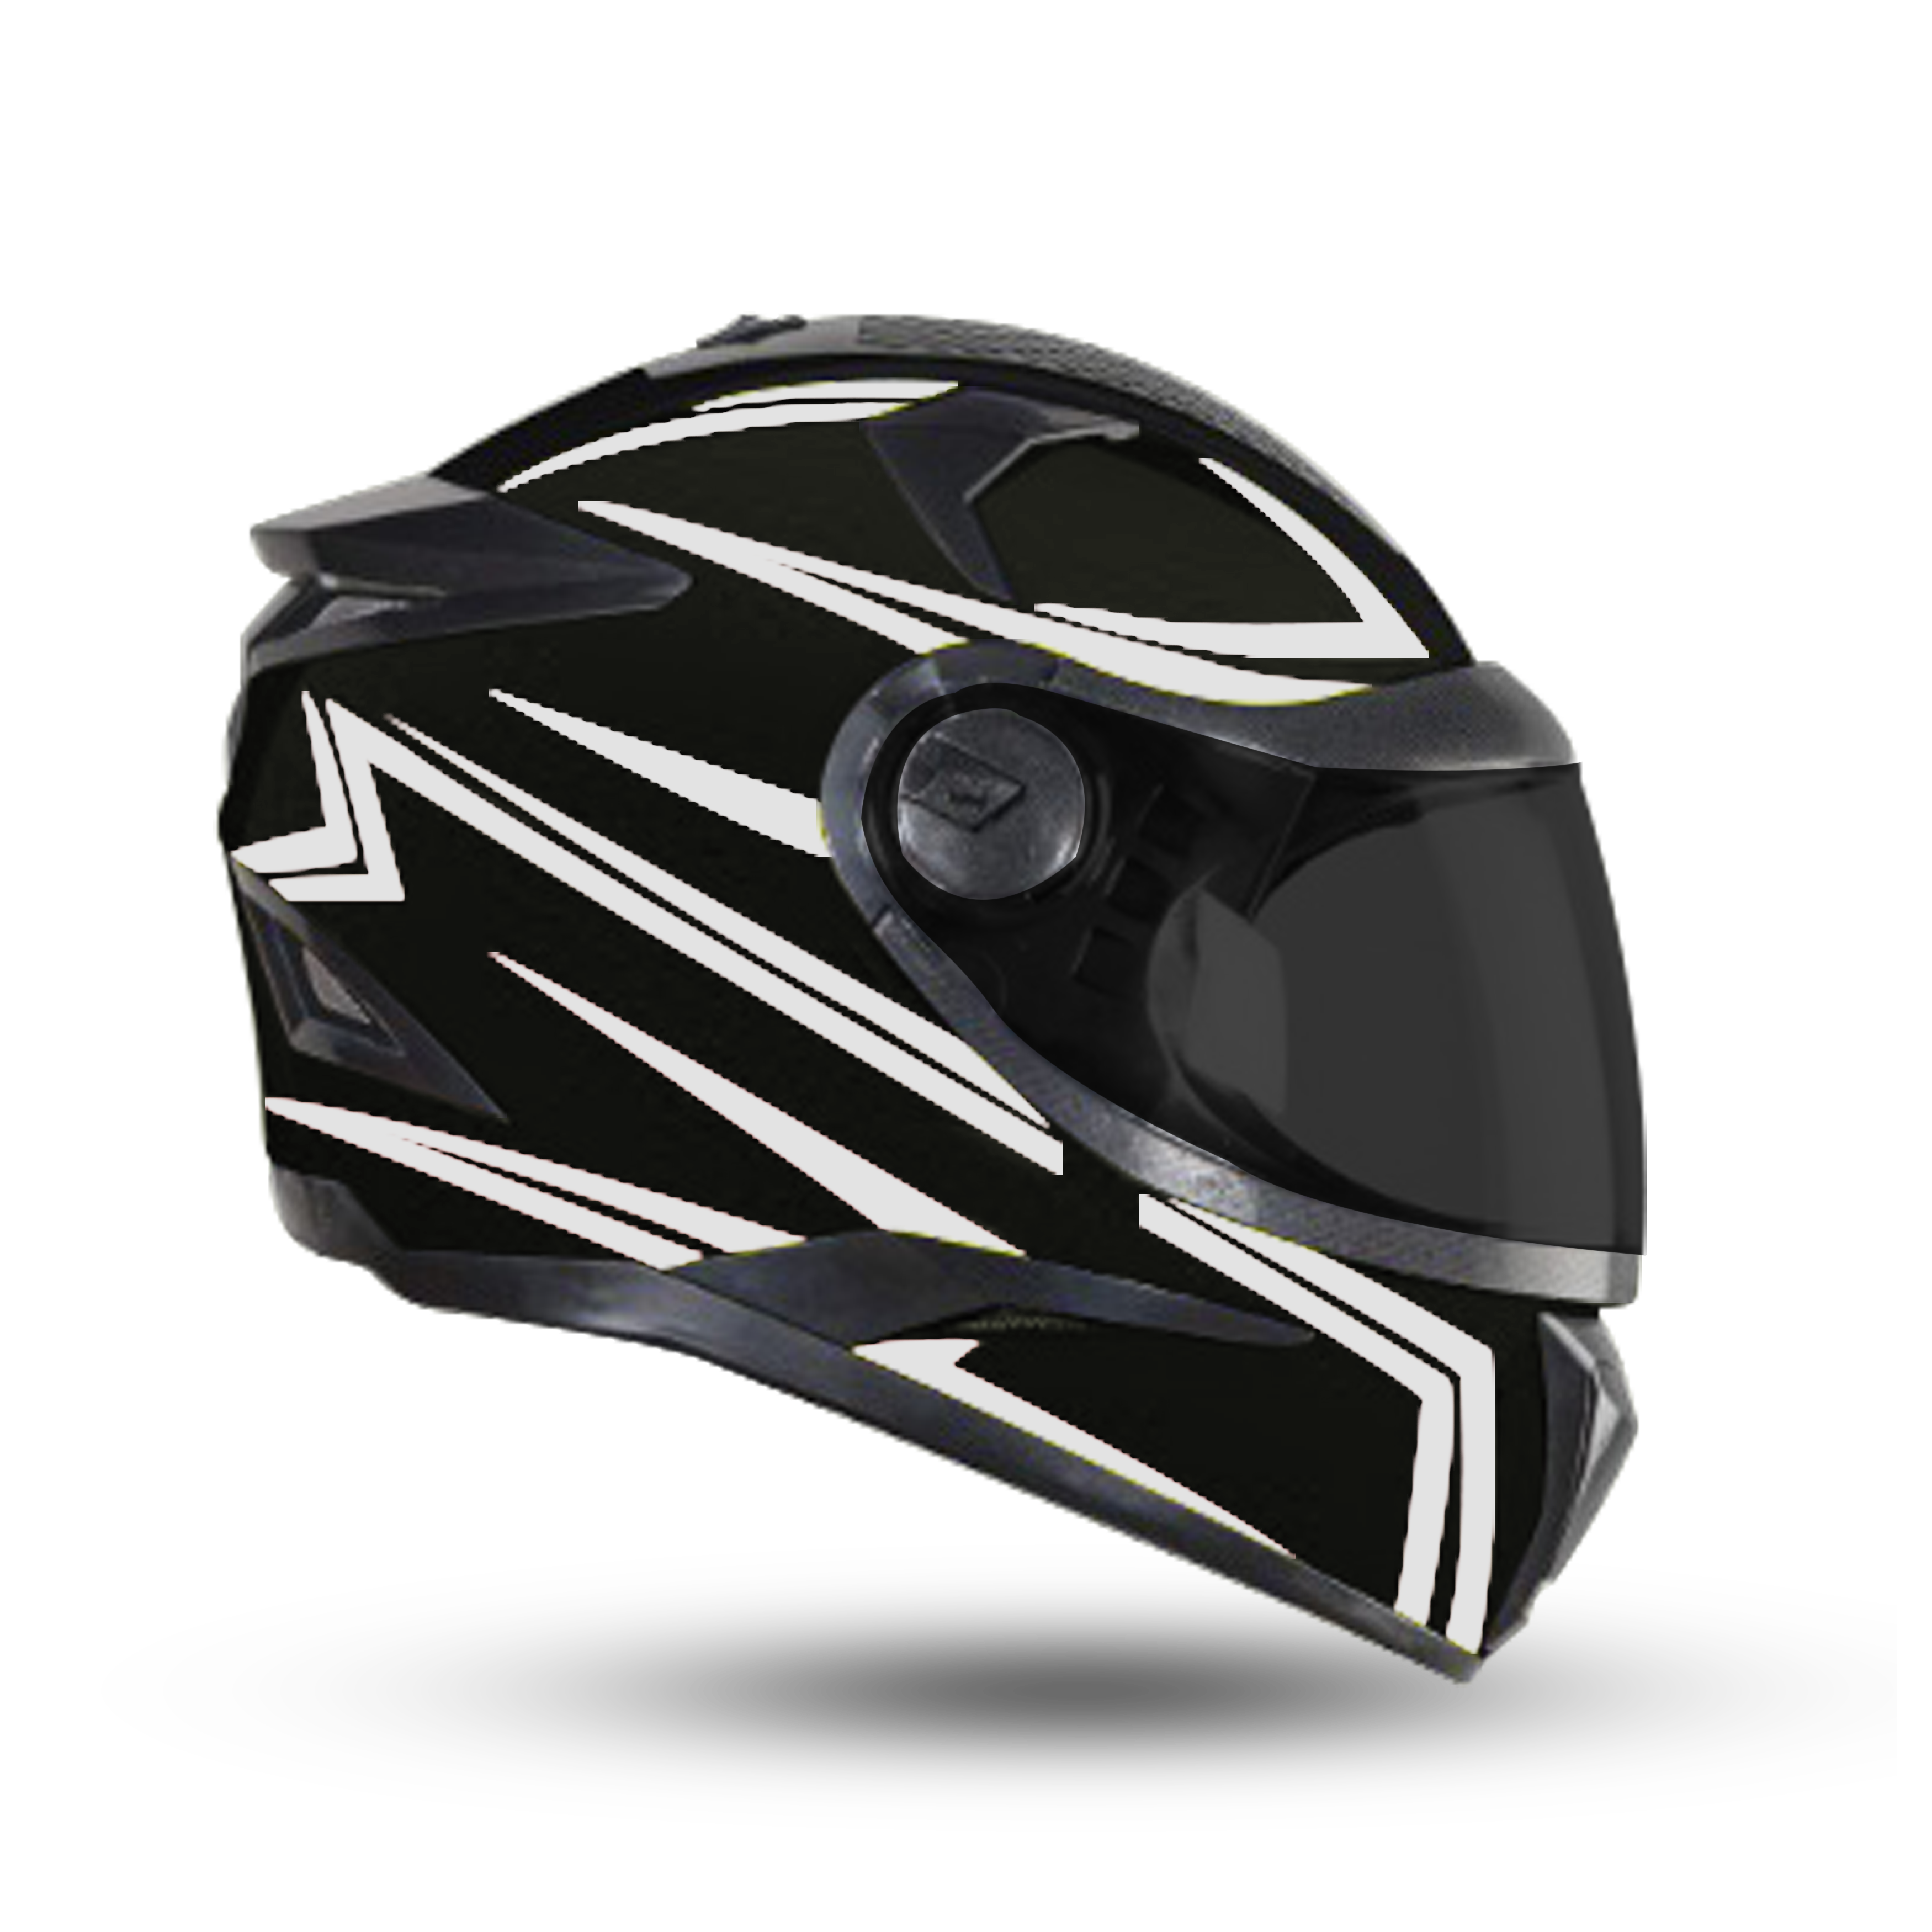 Steelbird 7Wings Robot Opt ISI Certified Full Face Helmet With Night Reflective Graphics (Matt Black Silver With Smoke Visor)